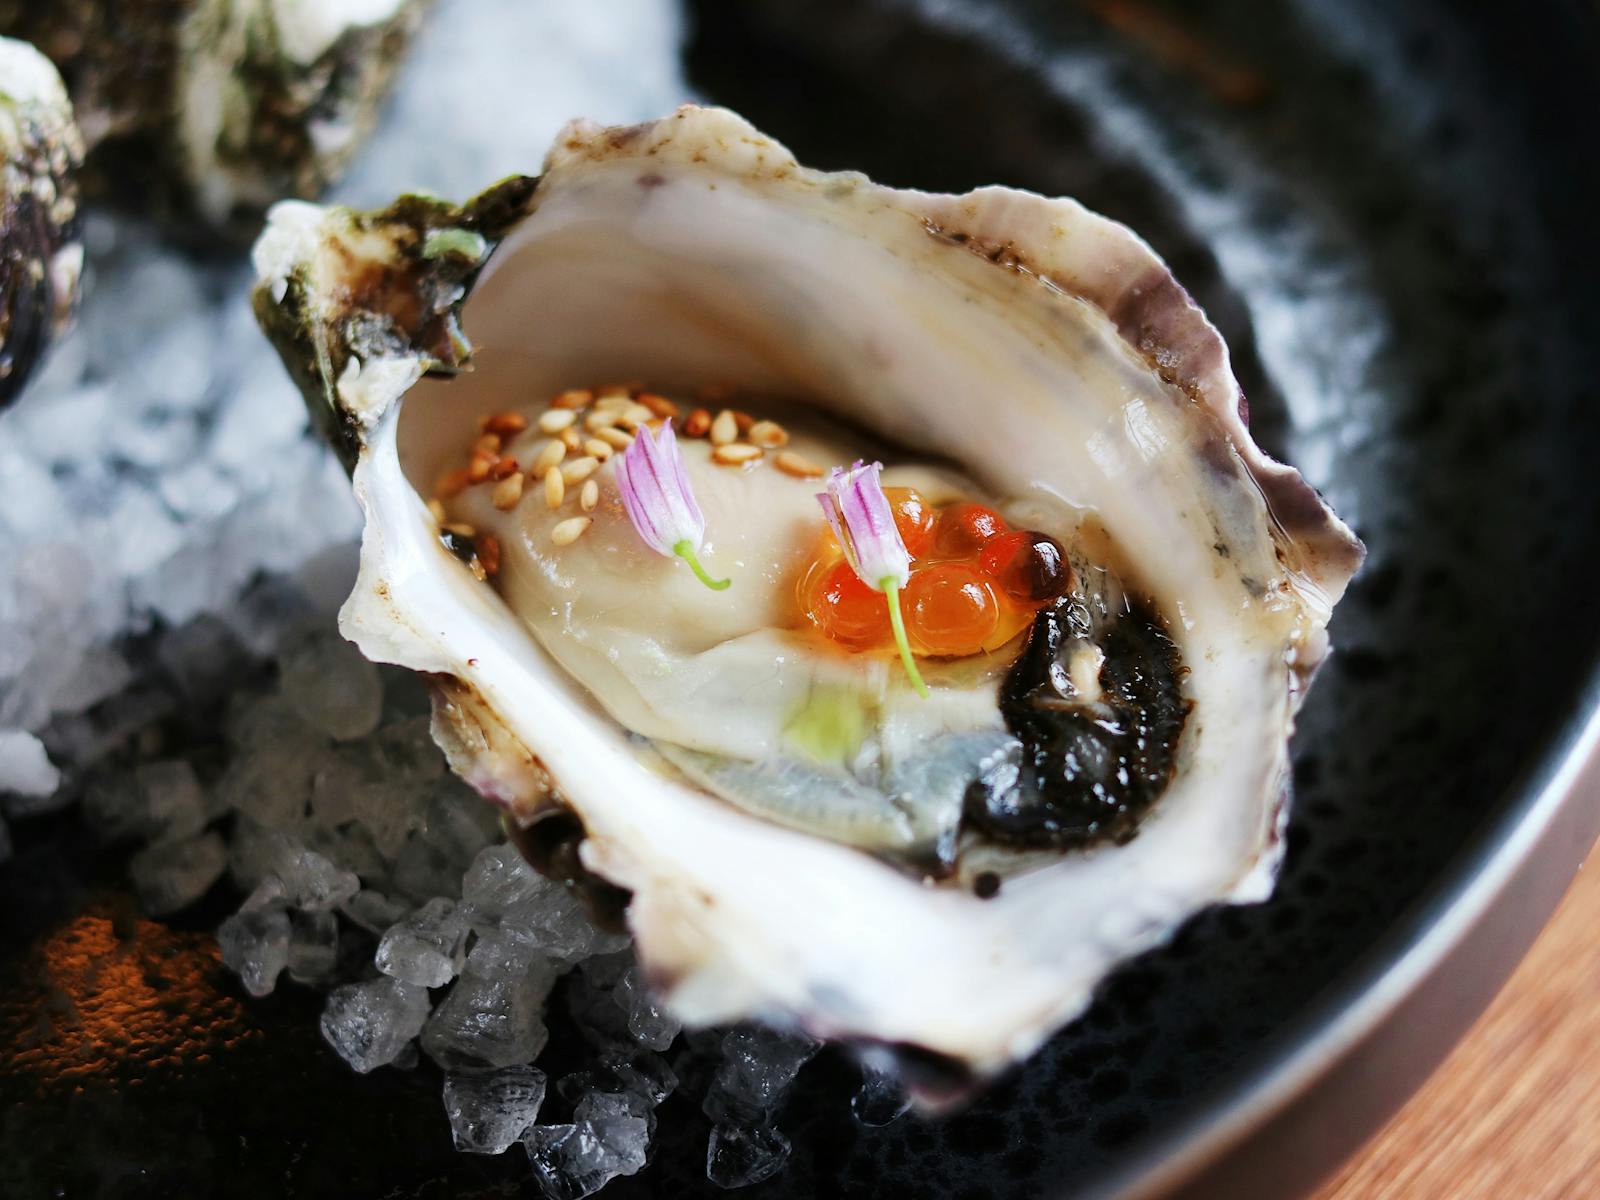 Close-up photo of an oyster garnished with roe and edible flowers